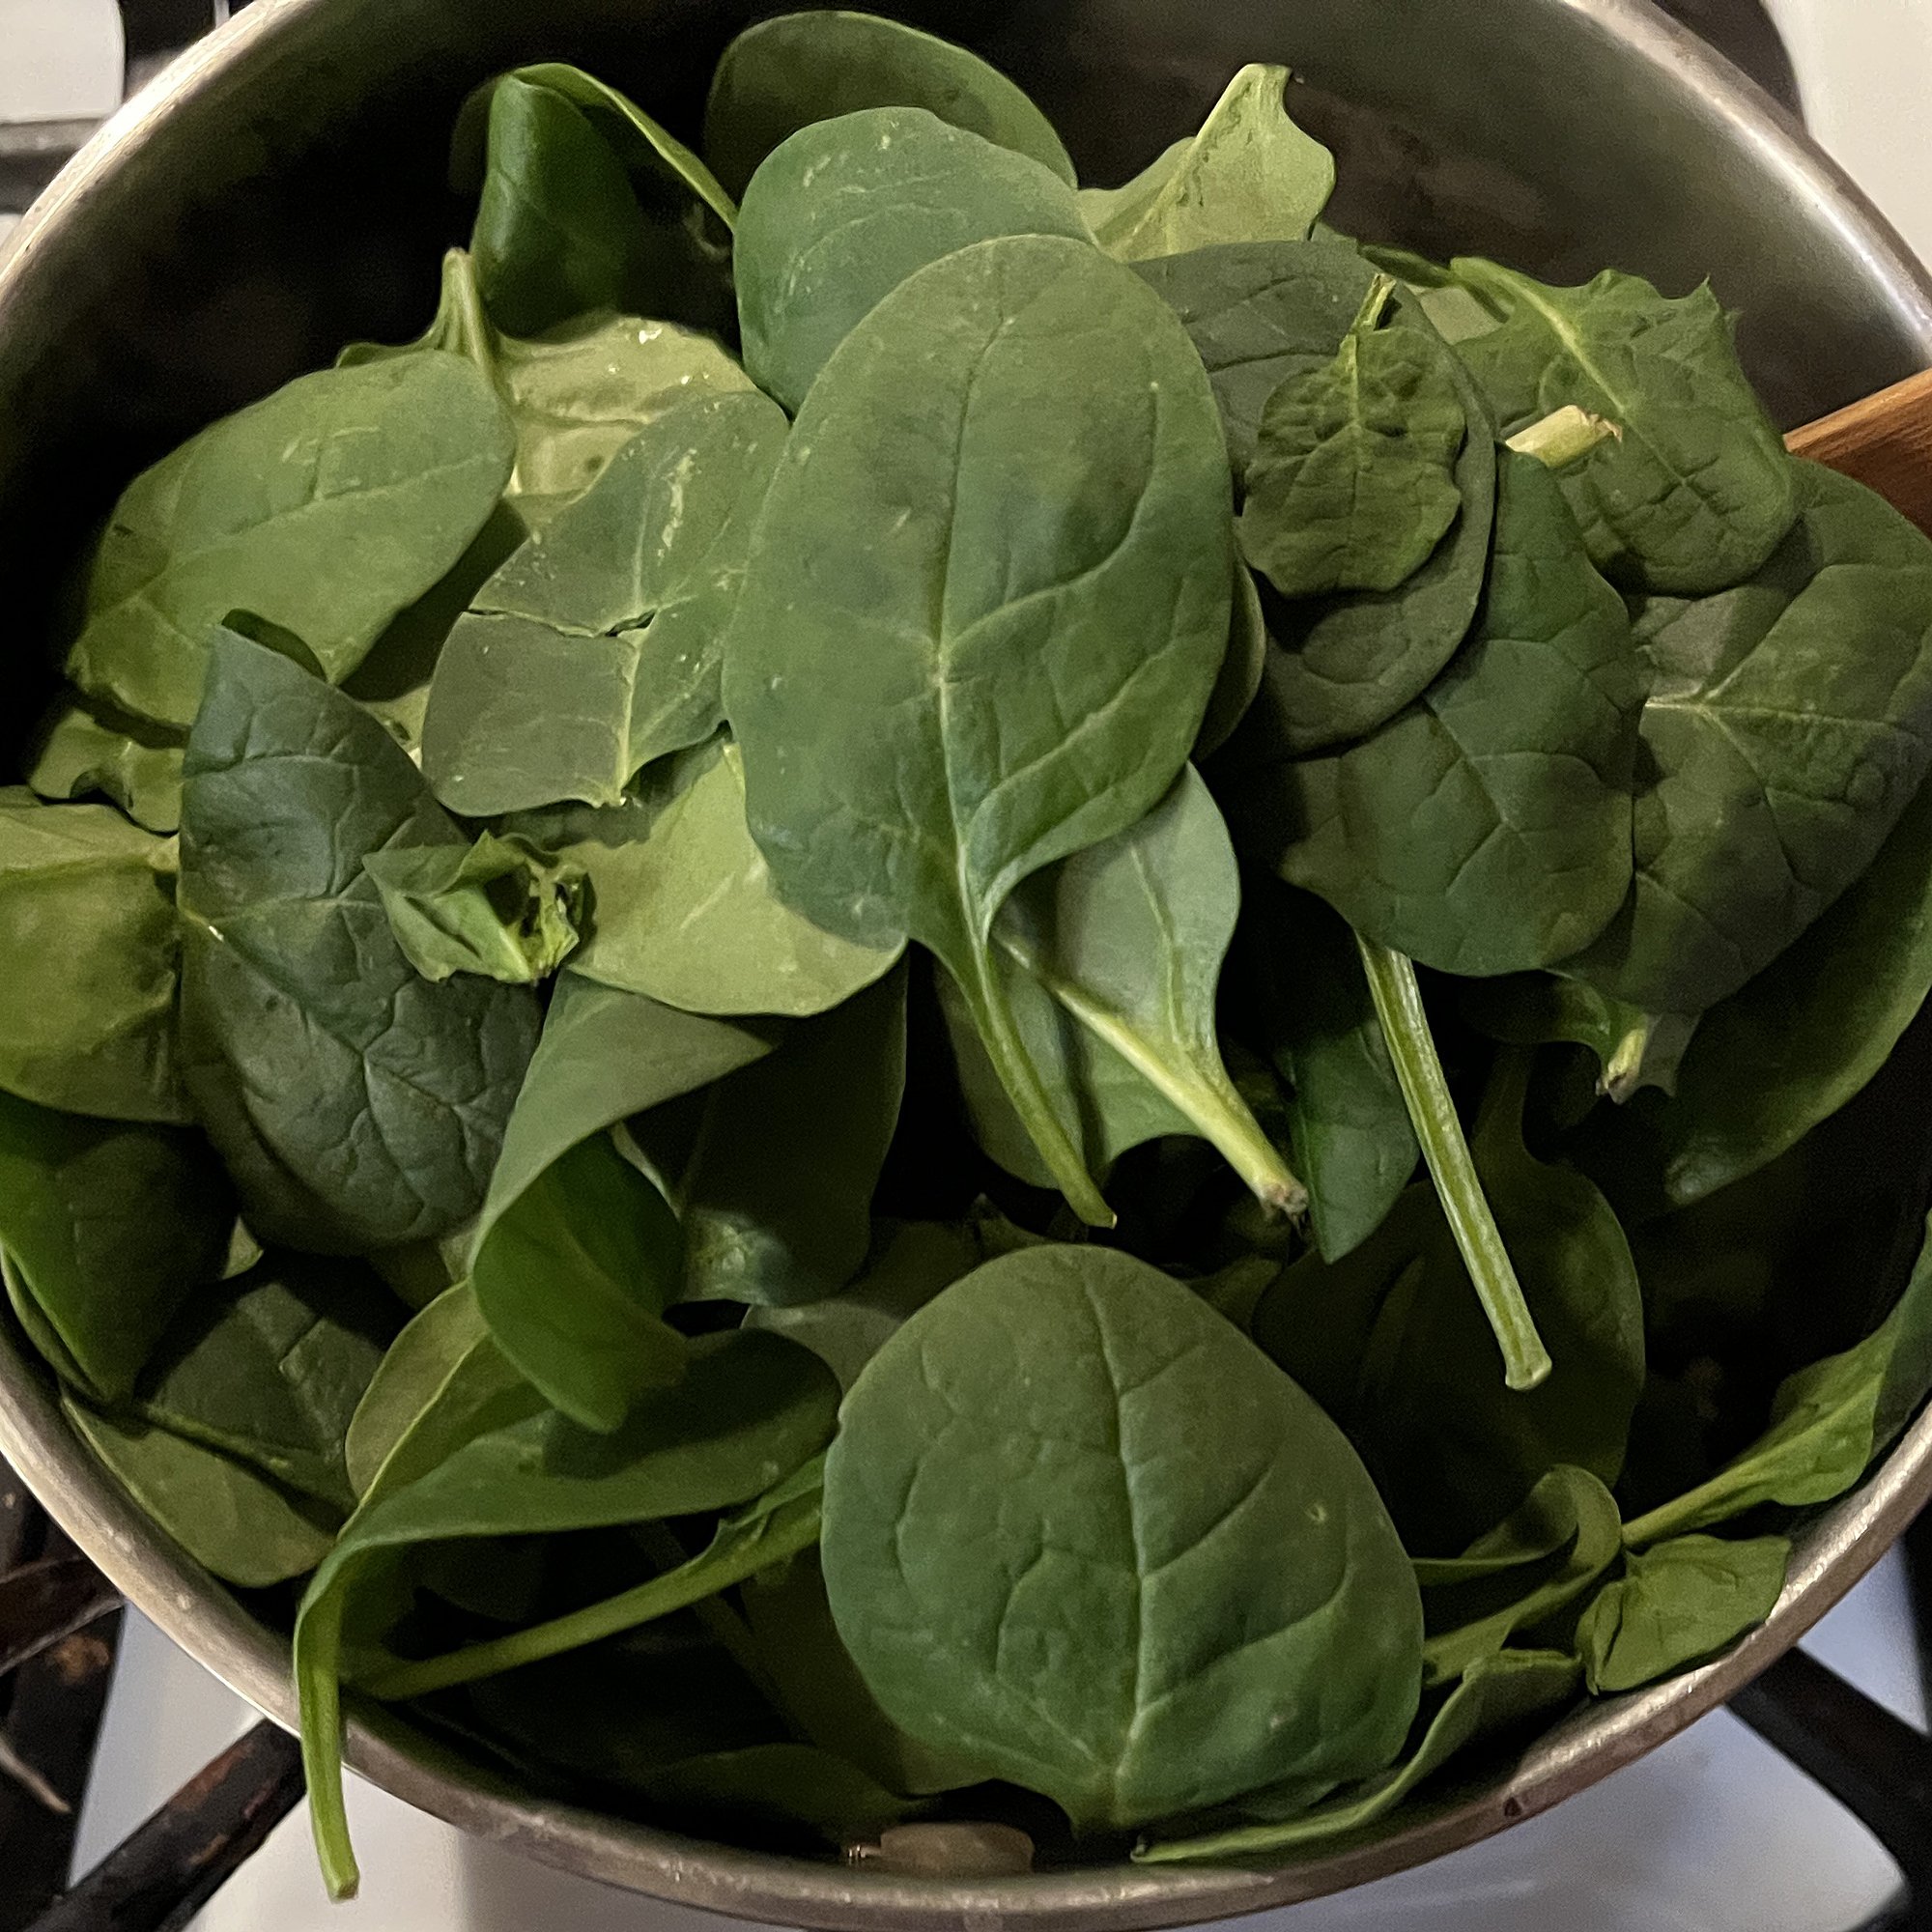 Add spinach and mix until wilted.